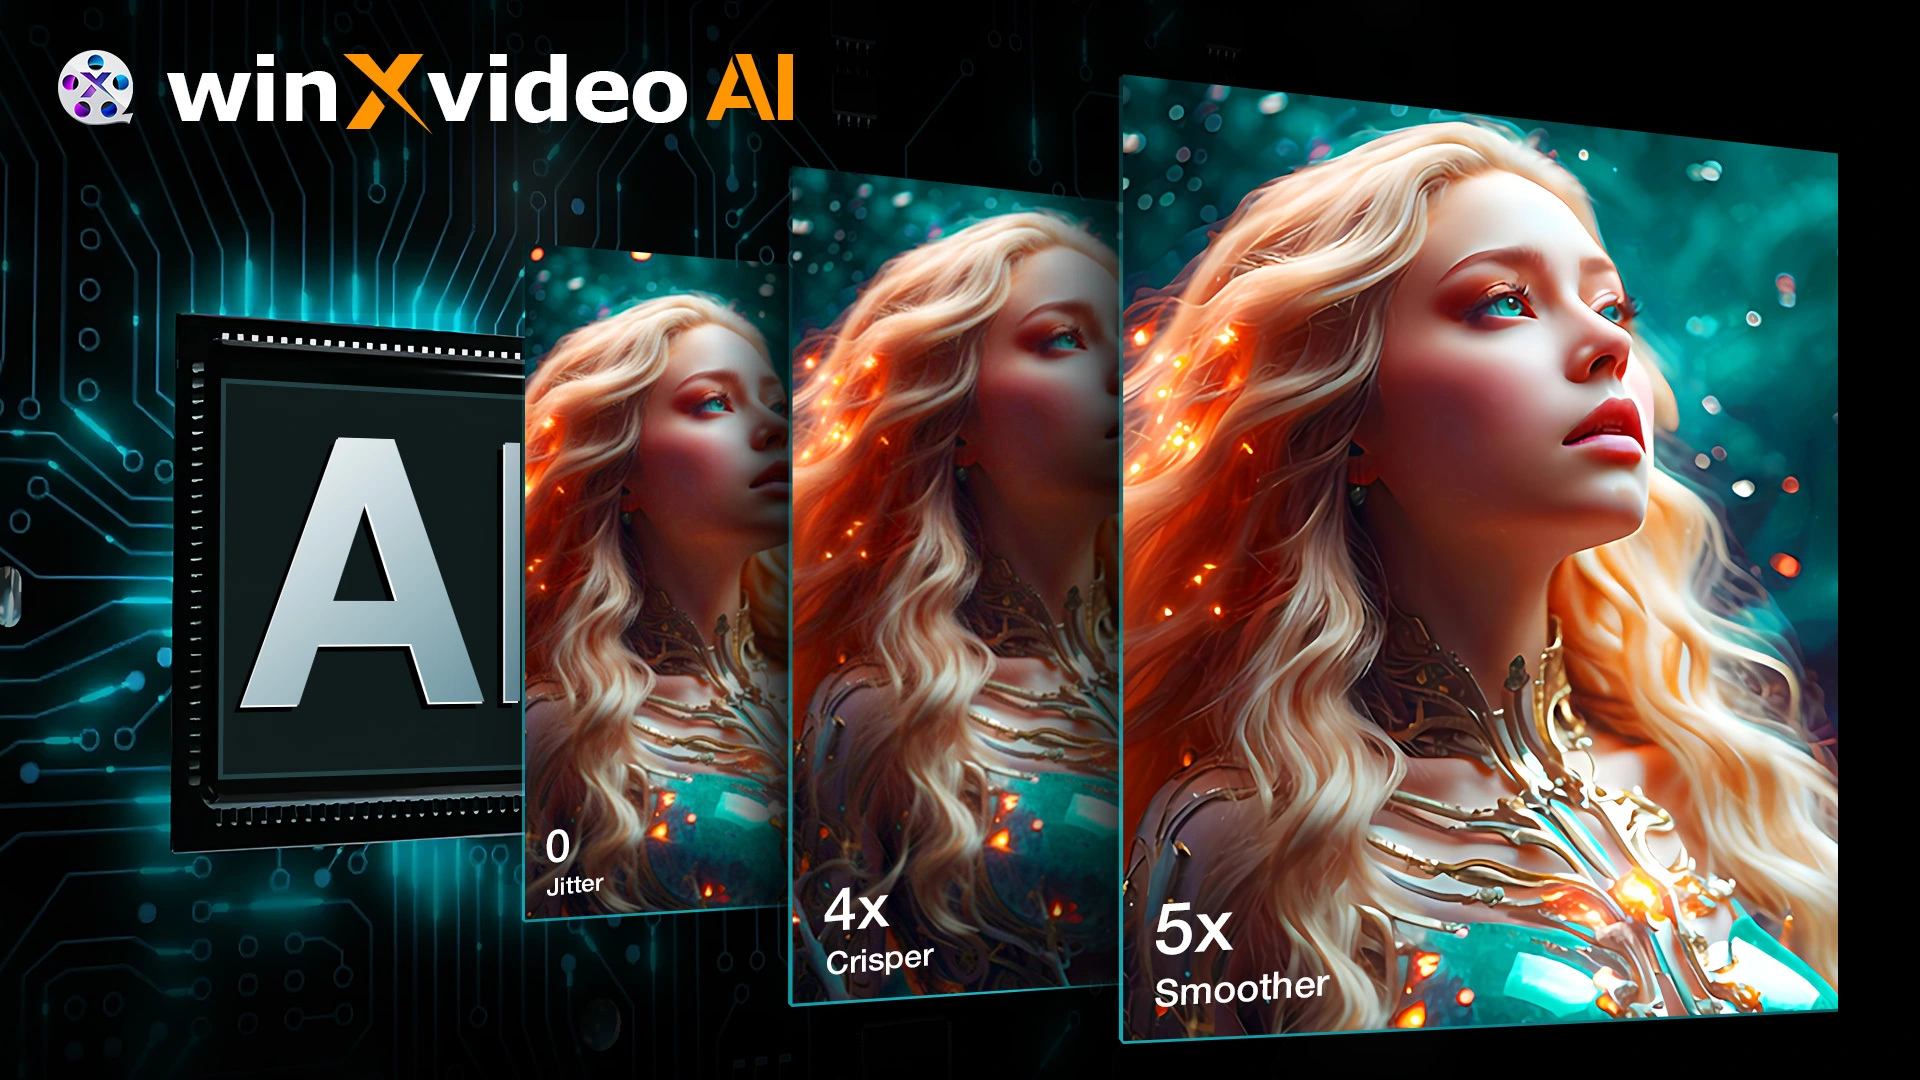 Winxvideo AI Review [Easily Upscale Video & Image Quality]